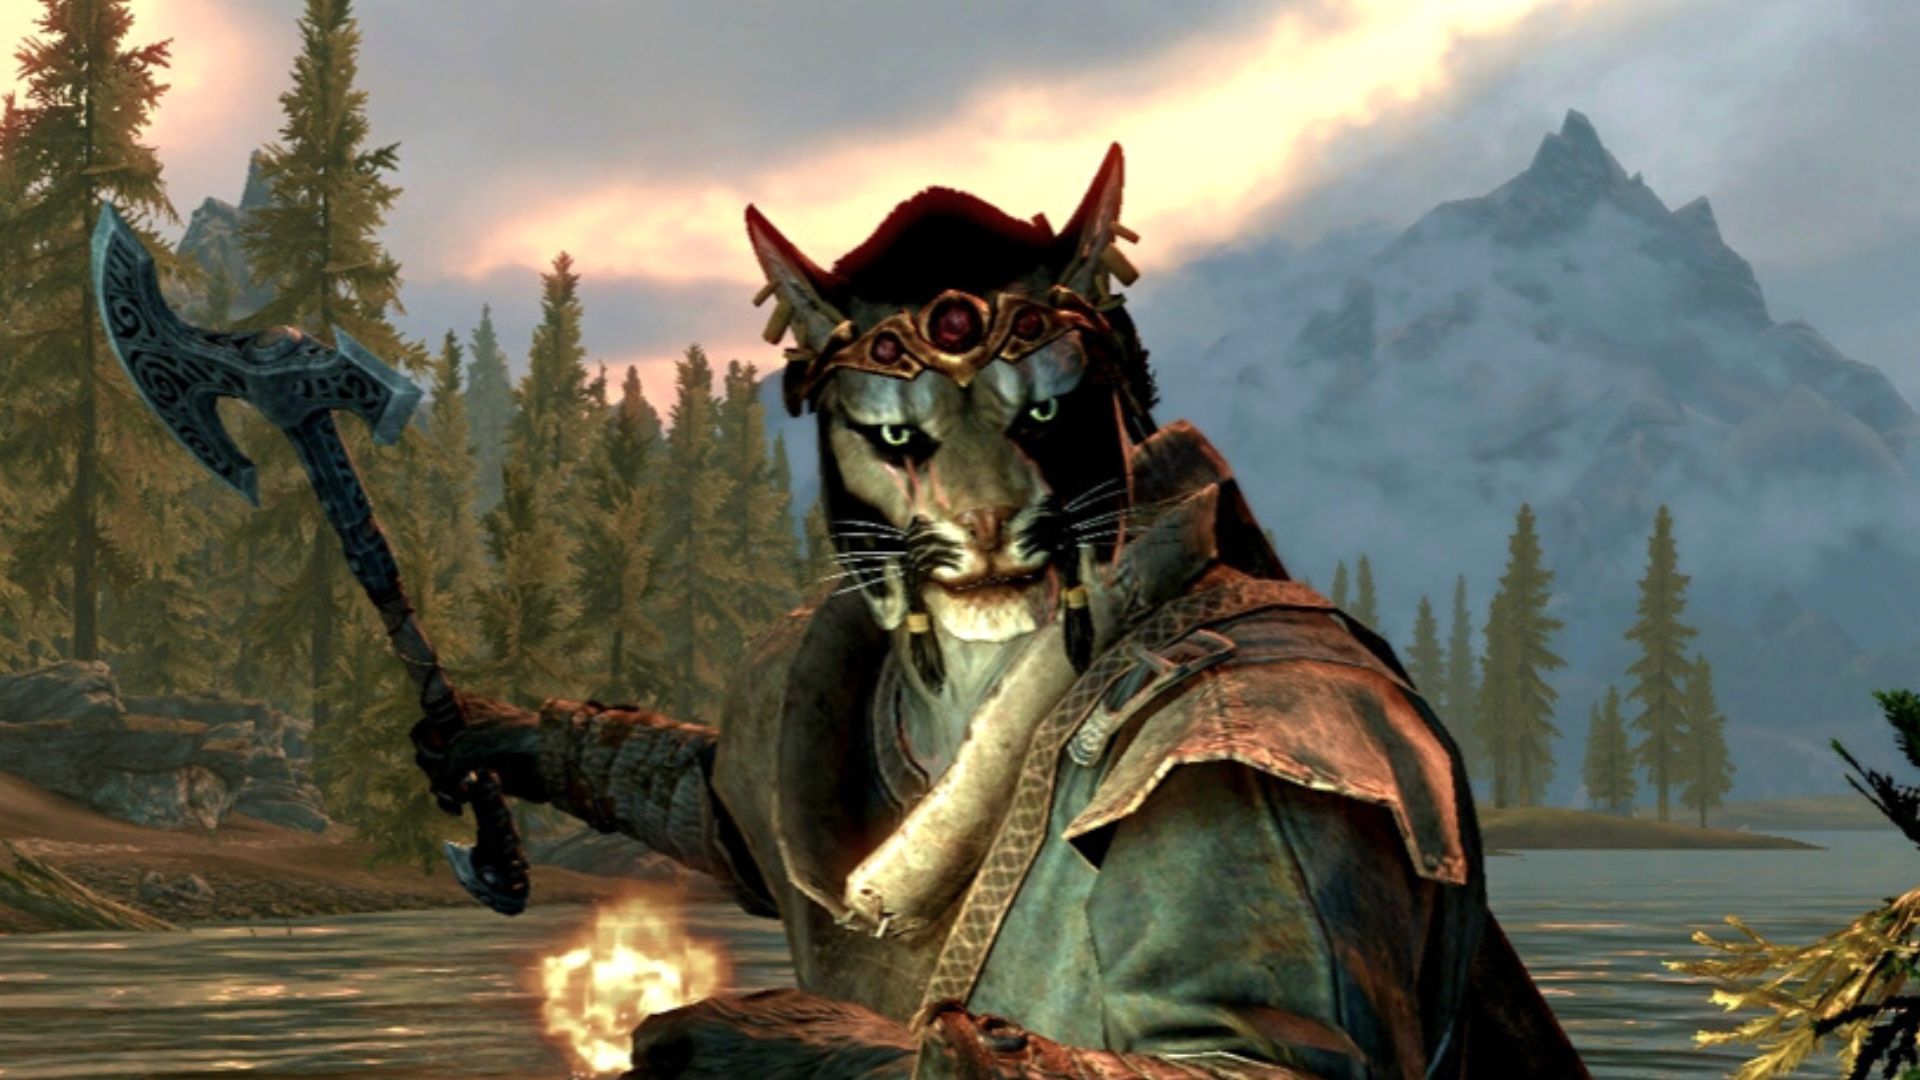 Skyrim in real life would be hell as Bethesda RPG faces financial doom